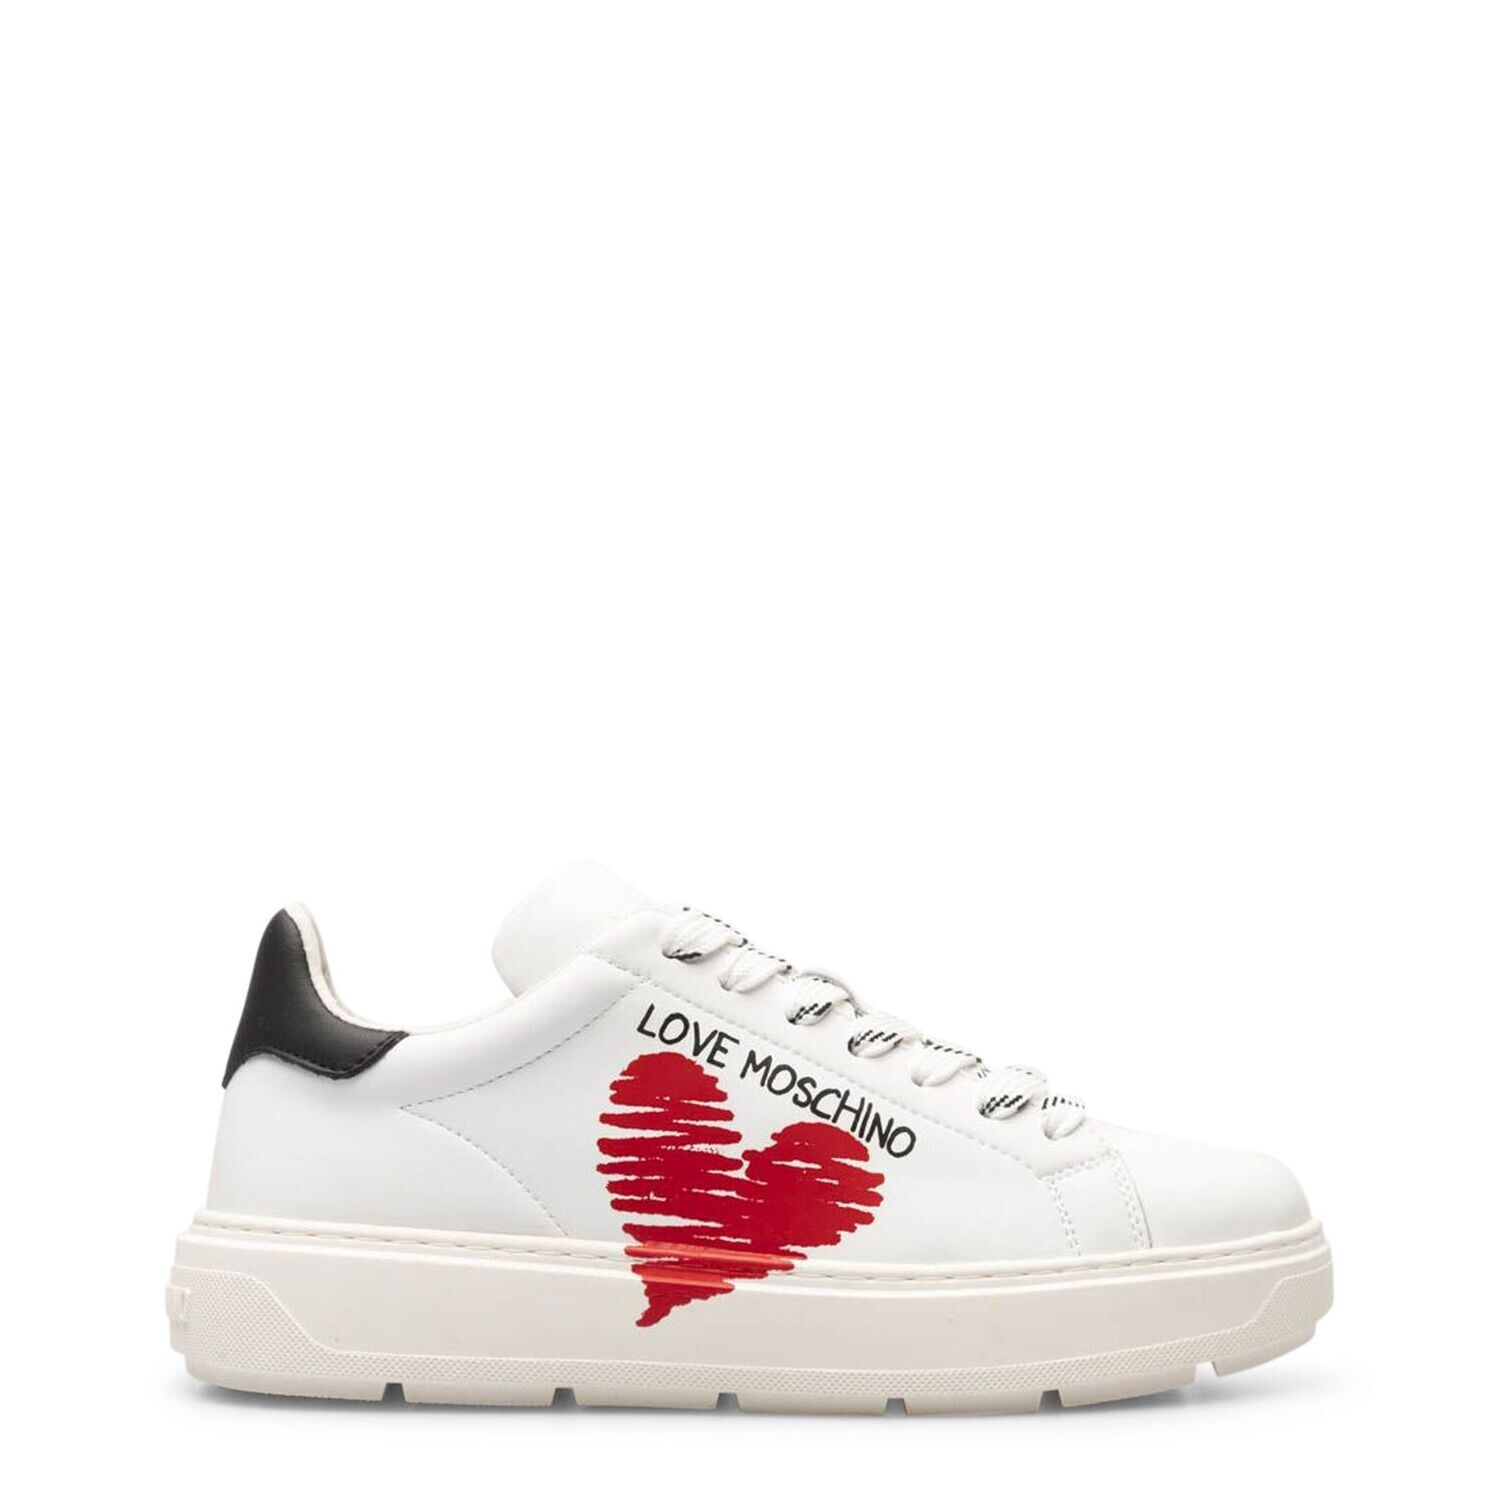 Love Moschino Red Heart Trainers, size: EU 36